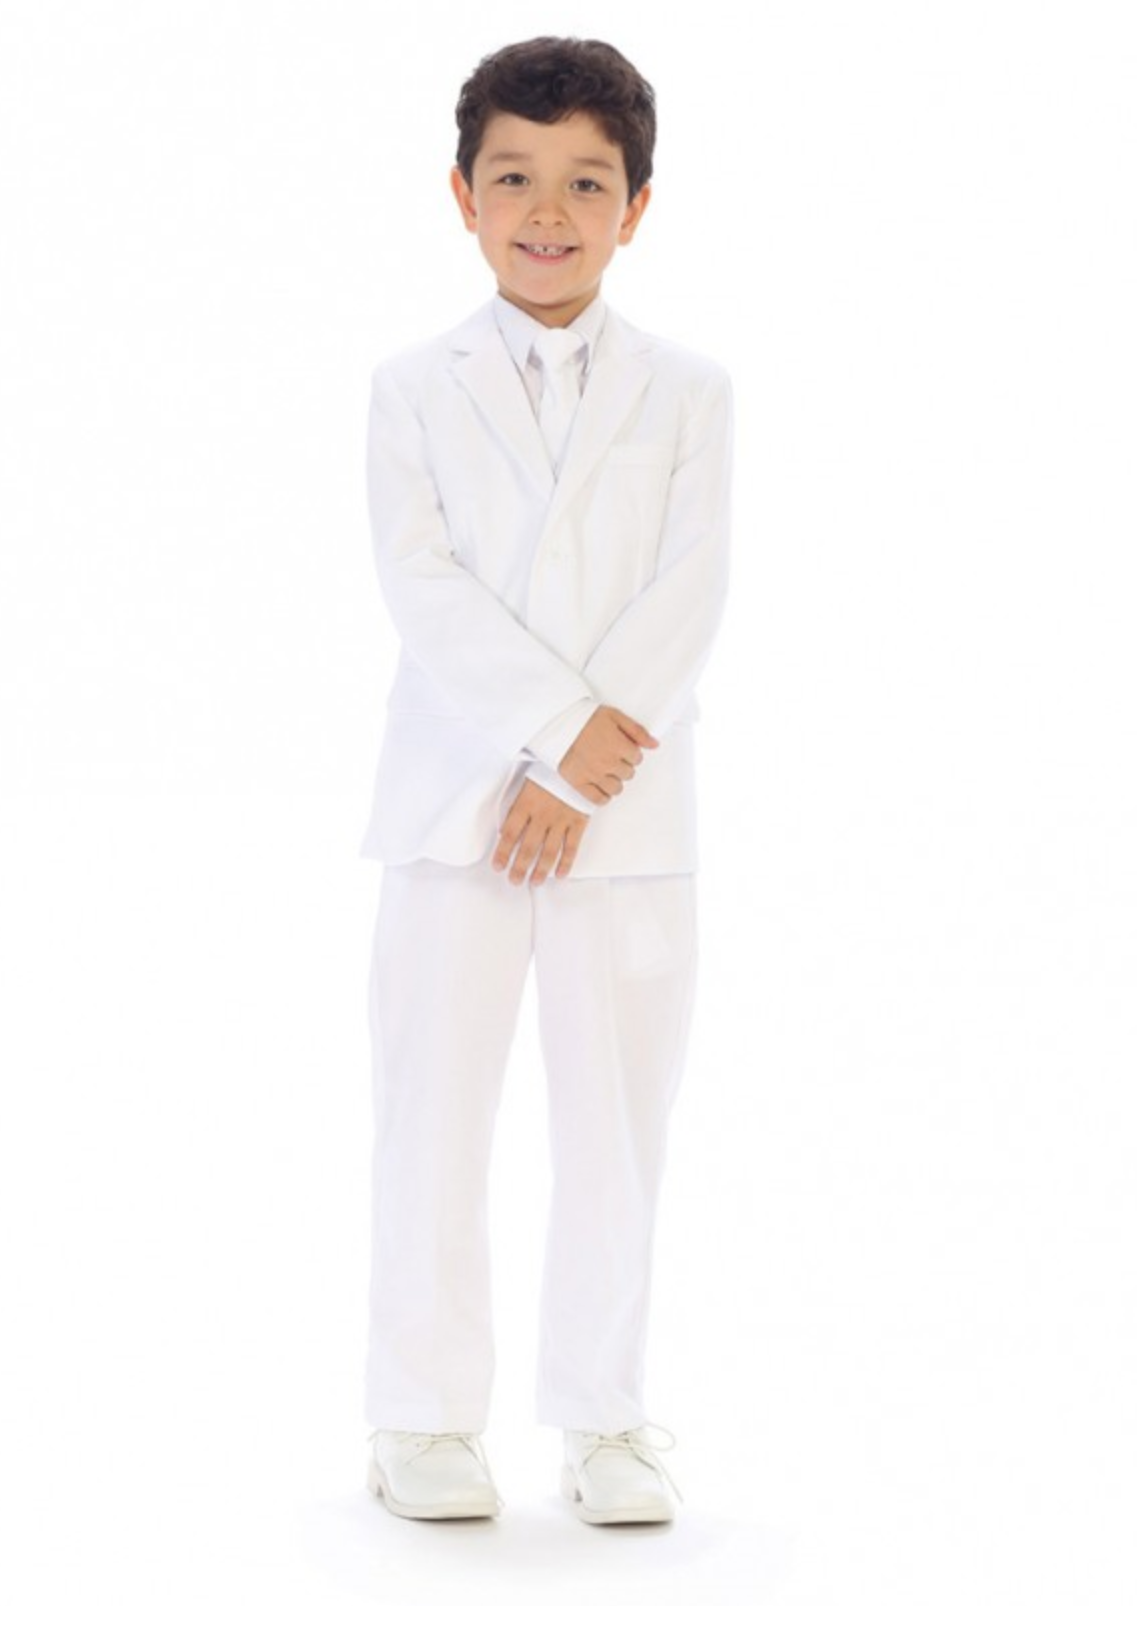 Boys, babies, infants, toddlers, all in white, celebrate their first communion with grace.